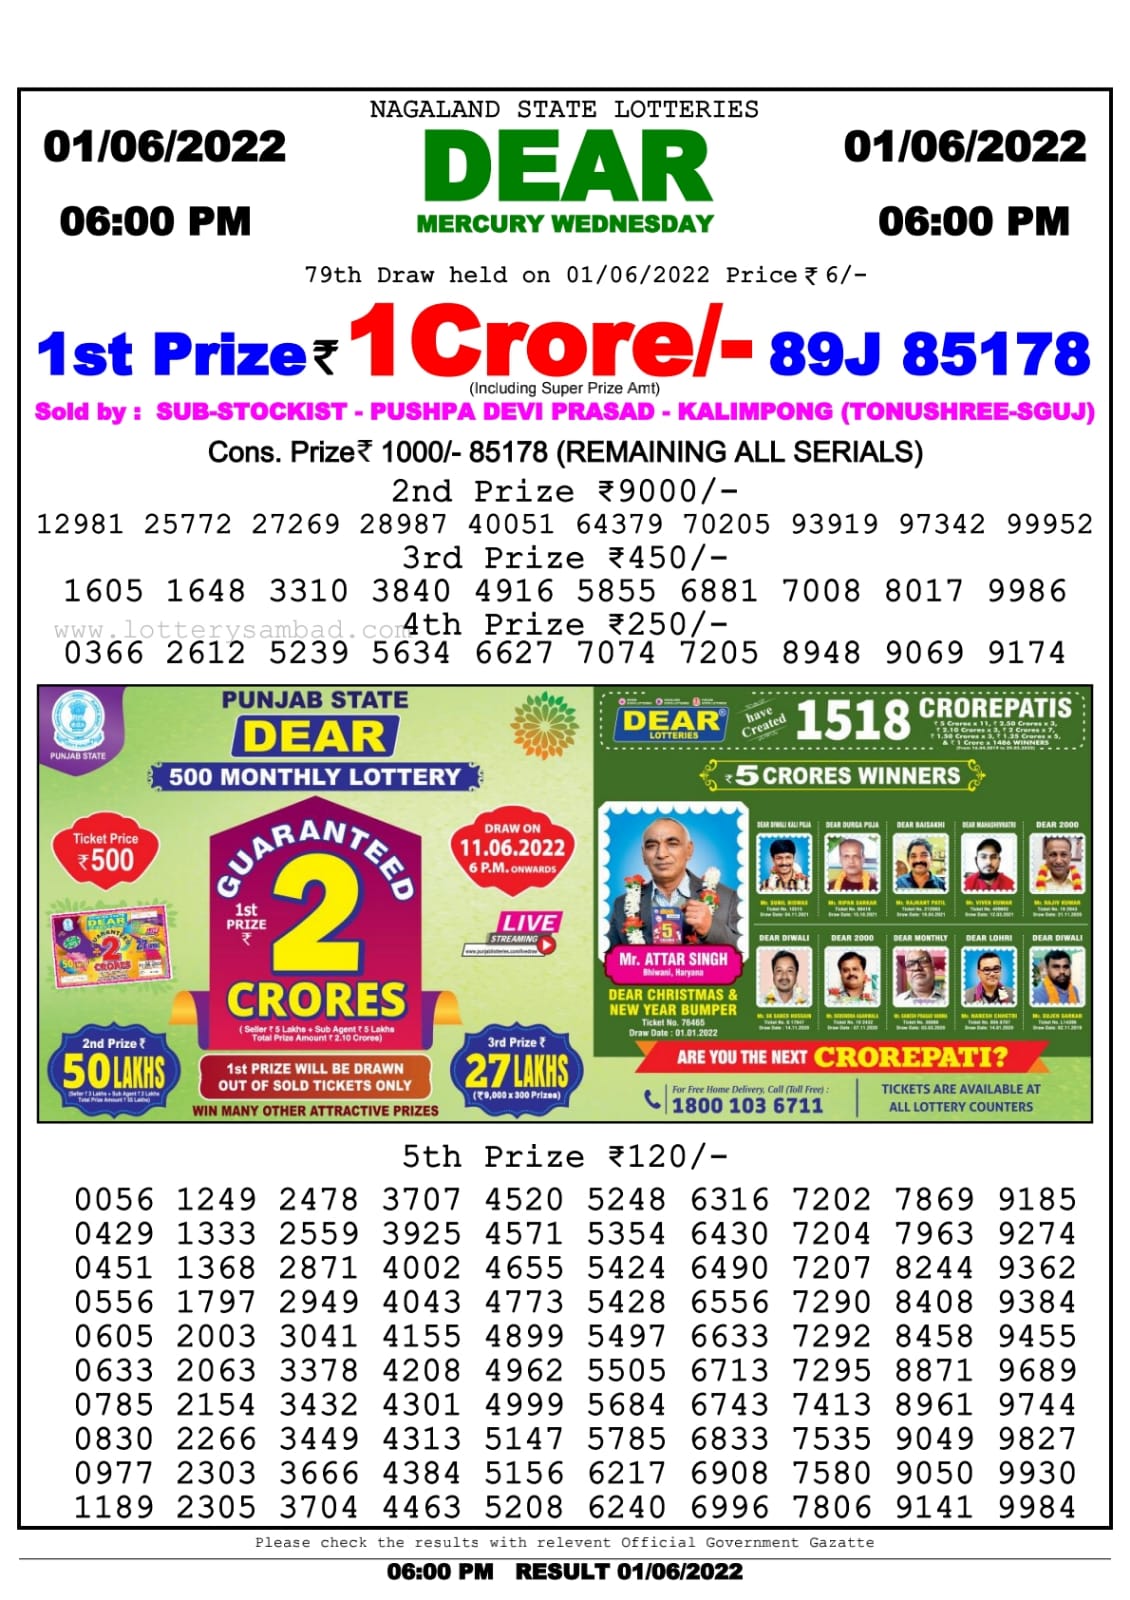 Dear Lottery Nagaland state Lottery Results 06.00 pm 01.06.2022